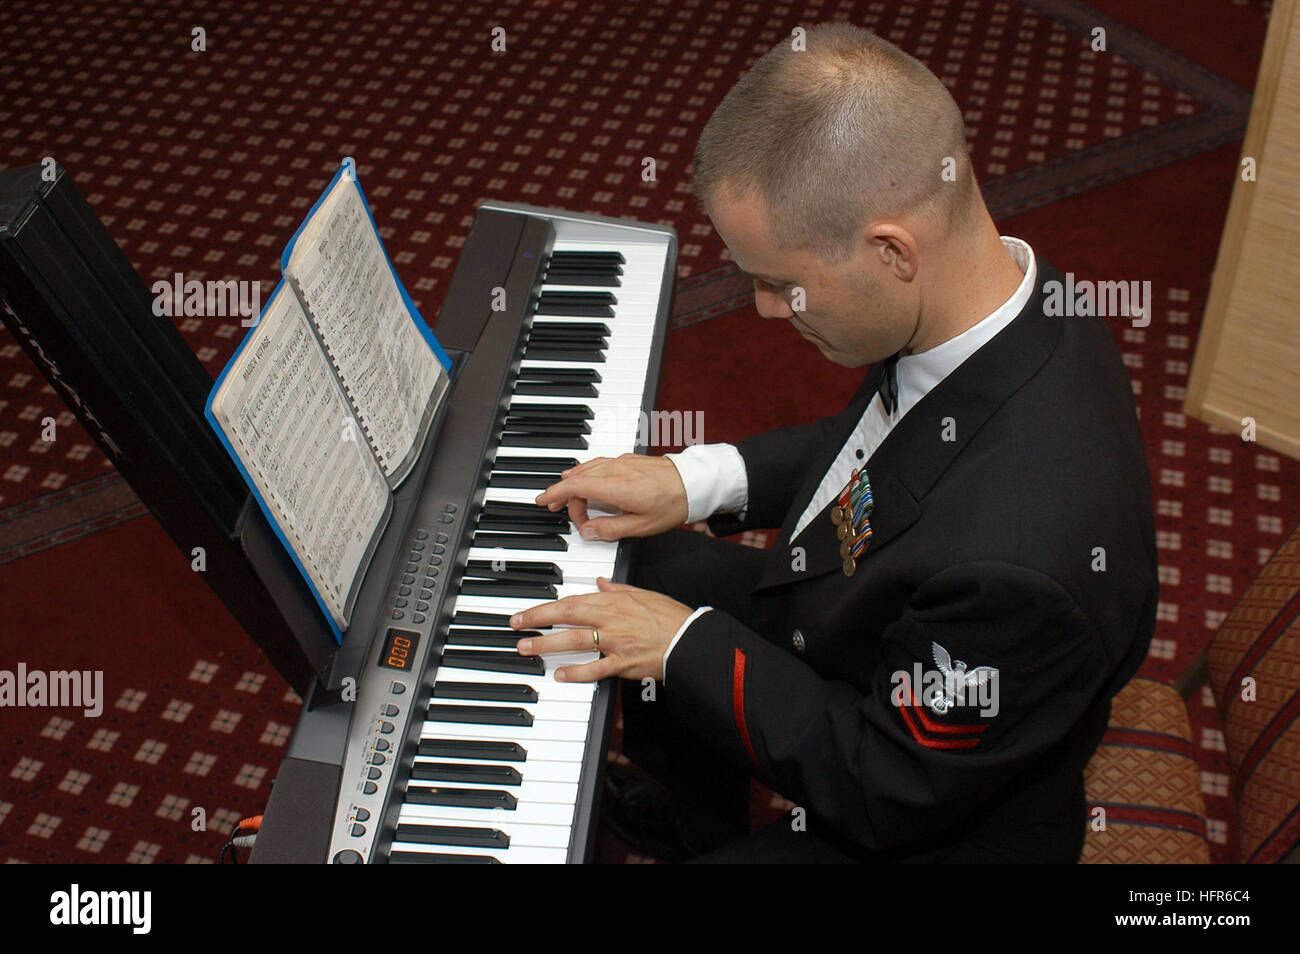 061024-N-2716P-002 Yokosuka, Japan (Oct. 24, 2006) - Musician 2nd Class Dirk Denton, assigned to the 7th Fleet Navy Band, plays the keyboard during the Executive Forum Dinner held at the Officer's Club of Commander Fleet Activities Yokosuka. U.S. Ambassador to Japan, Thomas Schieffer, was the guest speaker. U.S. Navy photo by Mass Communication Specialist 1st Class Paul J. Phelps (RELEASED) US Navy 061024-N-2716P-002 Musician 2nd Class Dirk Denton, assigned to the 7th Fleet Navy Band, plays the keyboard during the Executive Forum Dinner held at the Officer's Club of Commander Fleet Activities  Stock Photo